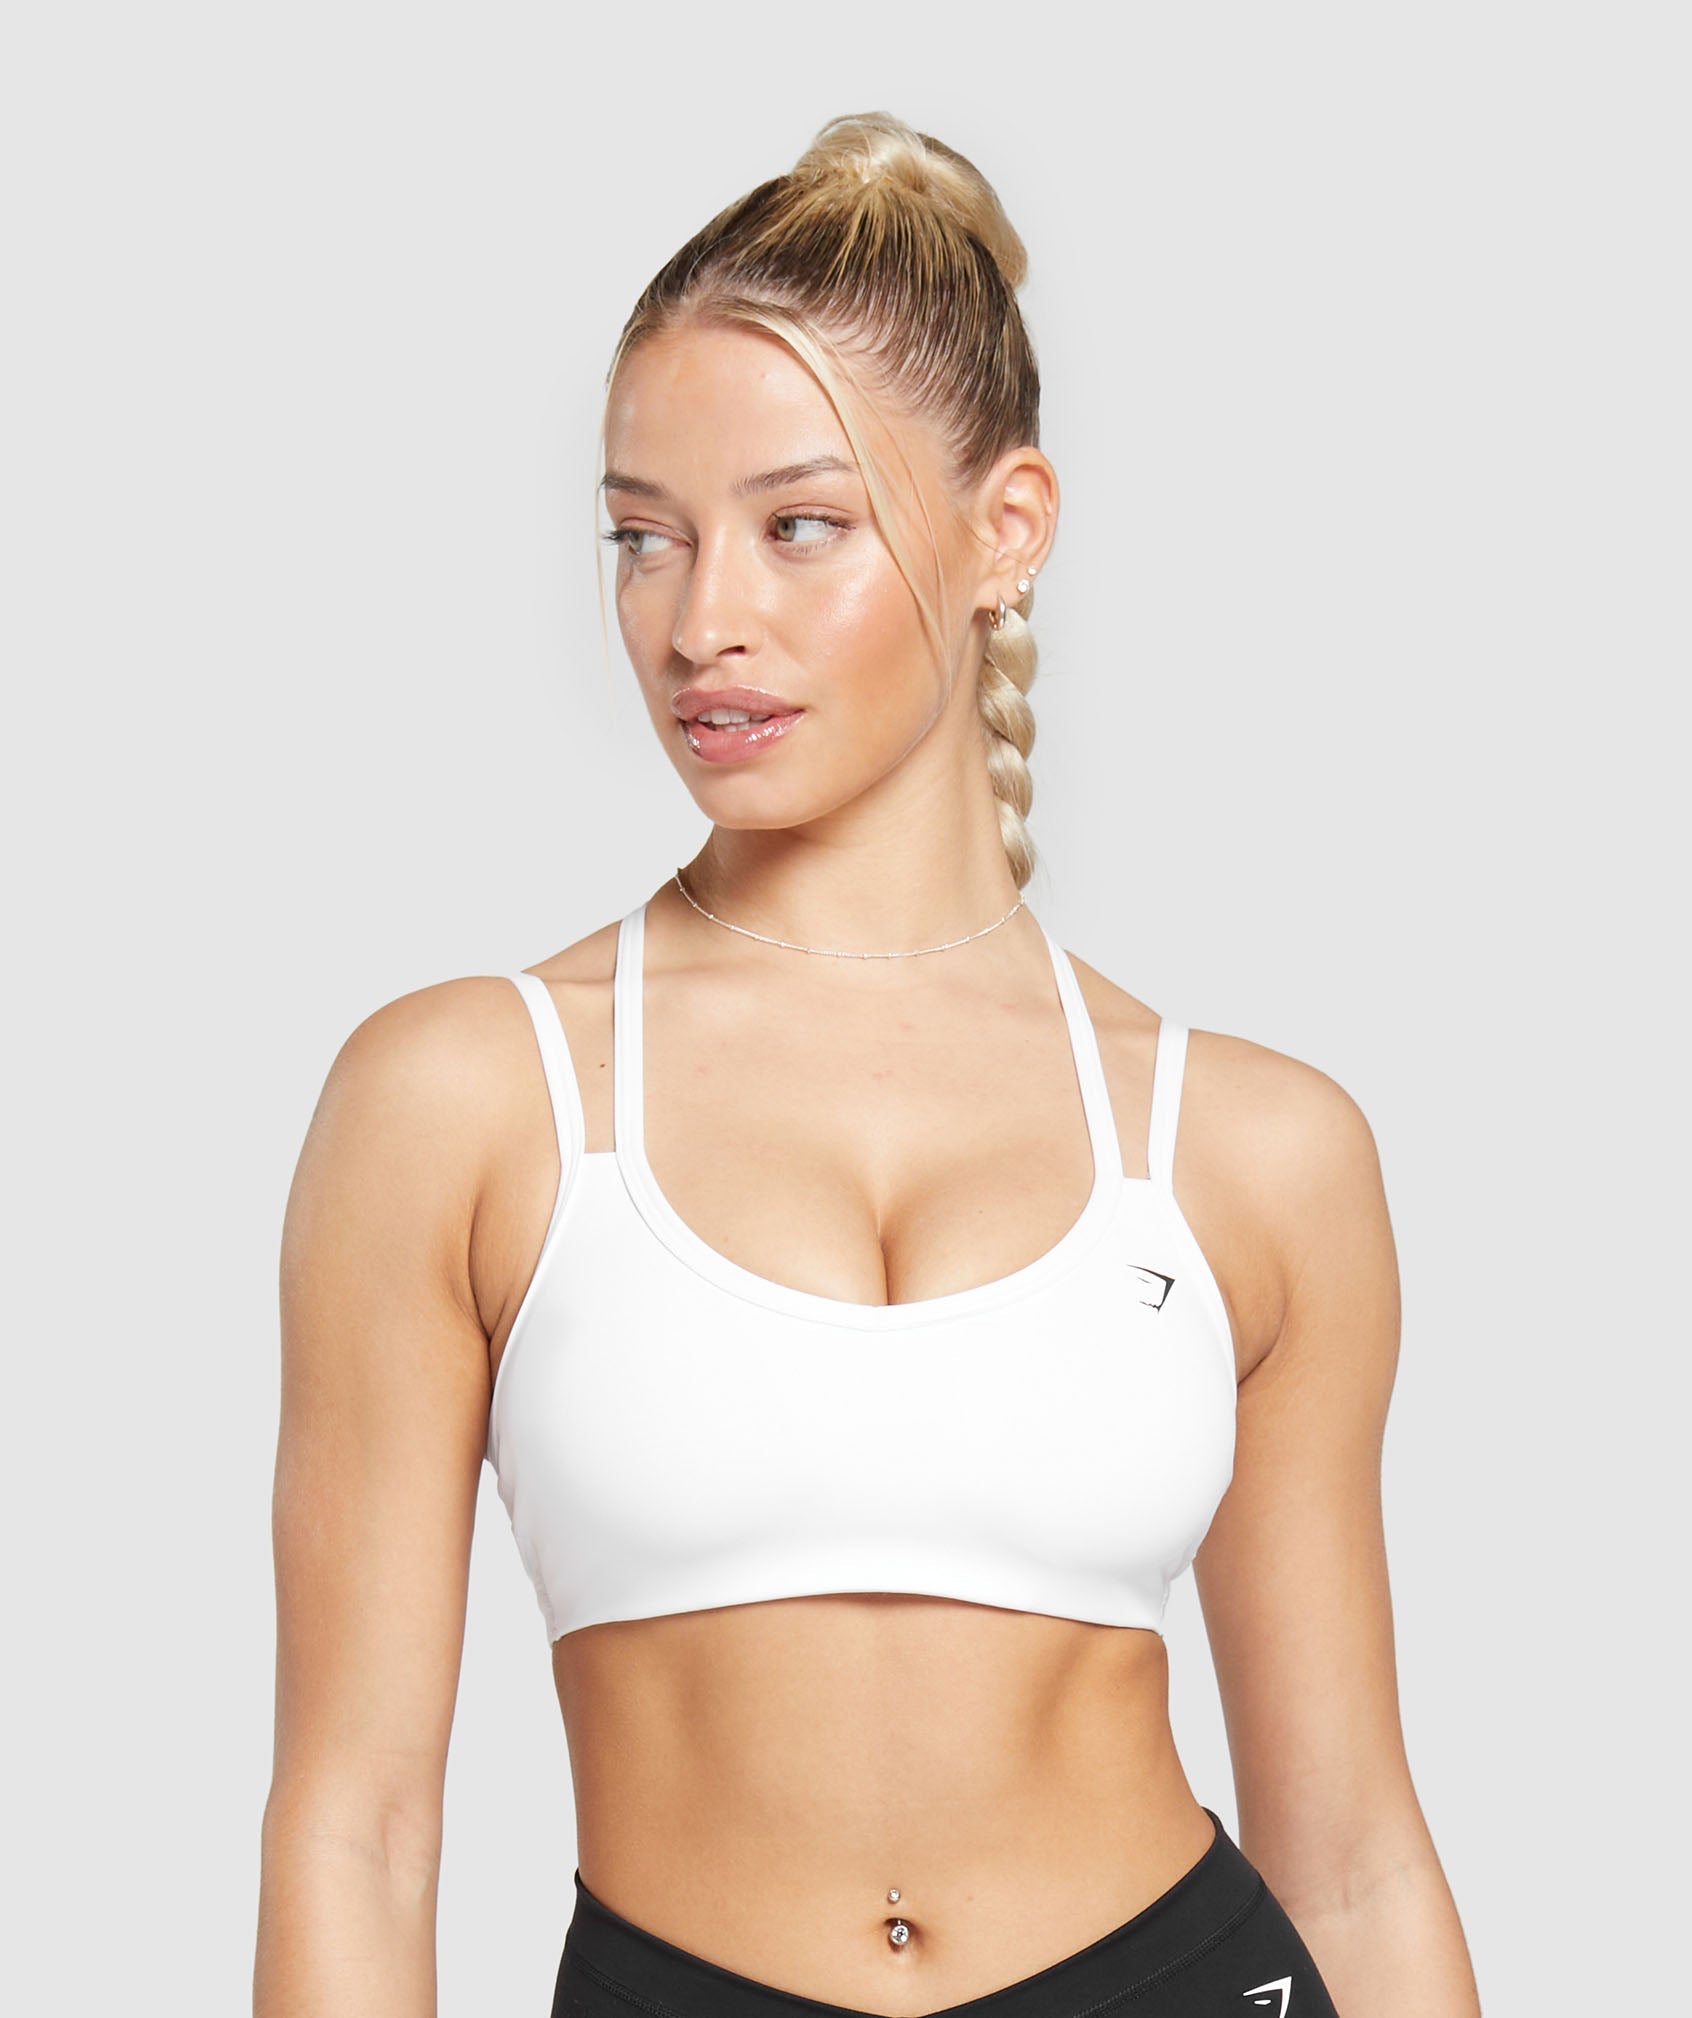 Athartle Strapless Bra,Athartle Bra,Wireless Supportive Sports Bra,Athartle  Bras for Women,Front Buckle Lift Bra (Color : E, Size : 32C/D) : :  Clothing, Shoes & Accessories